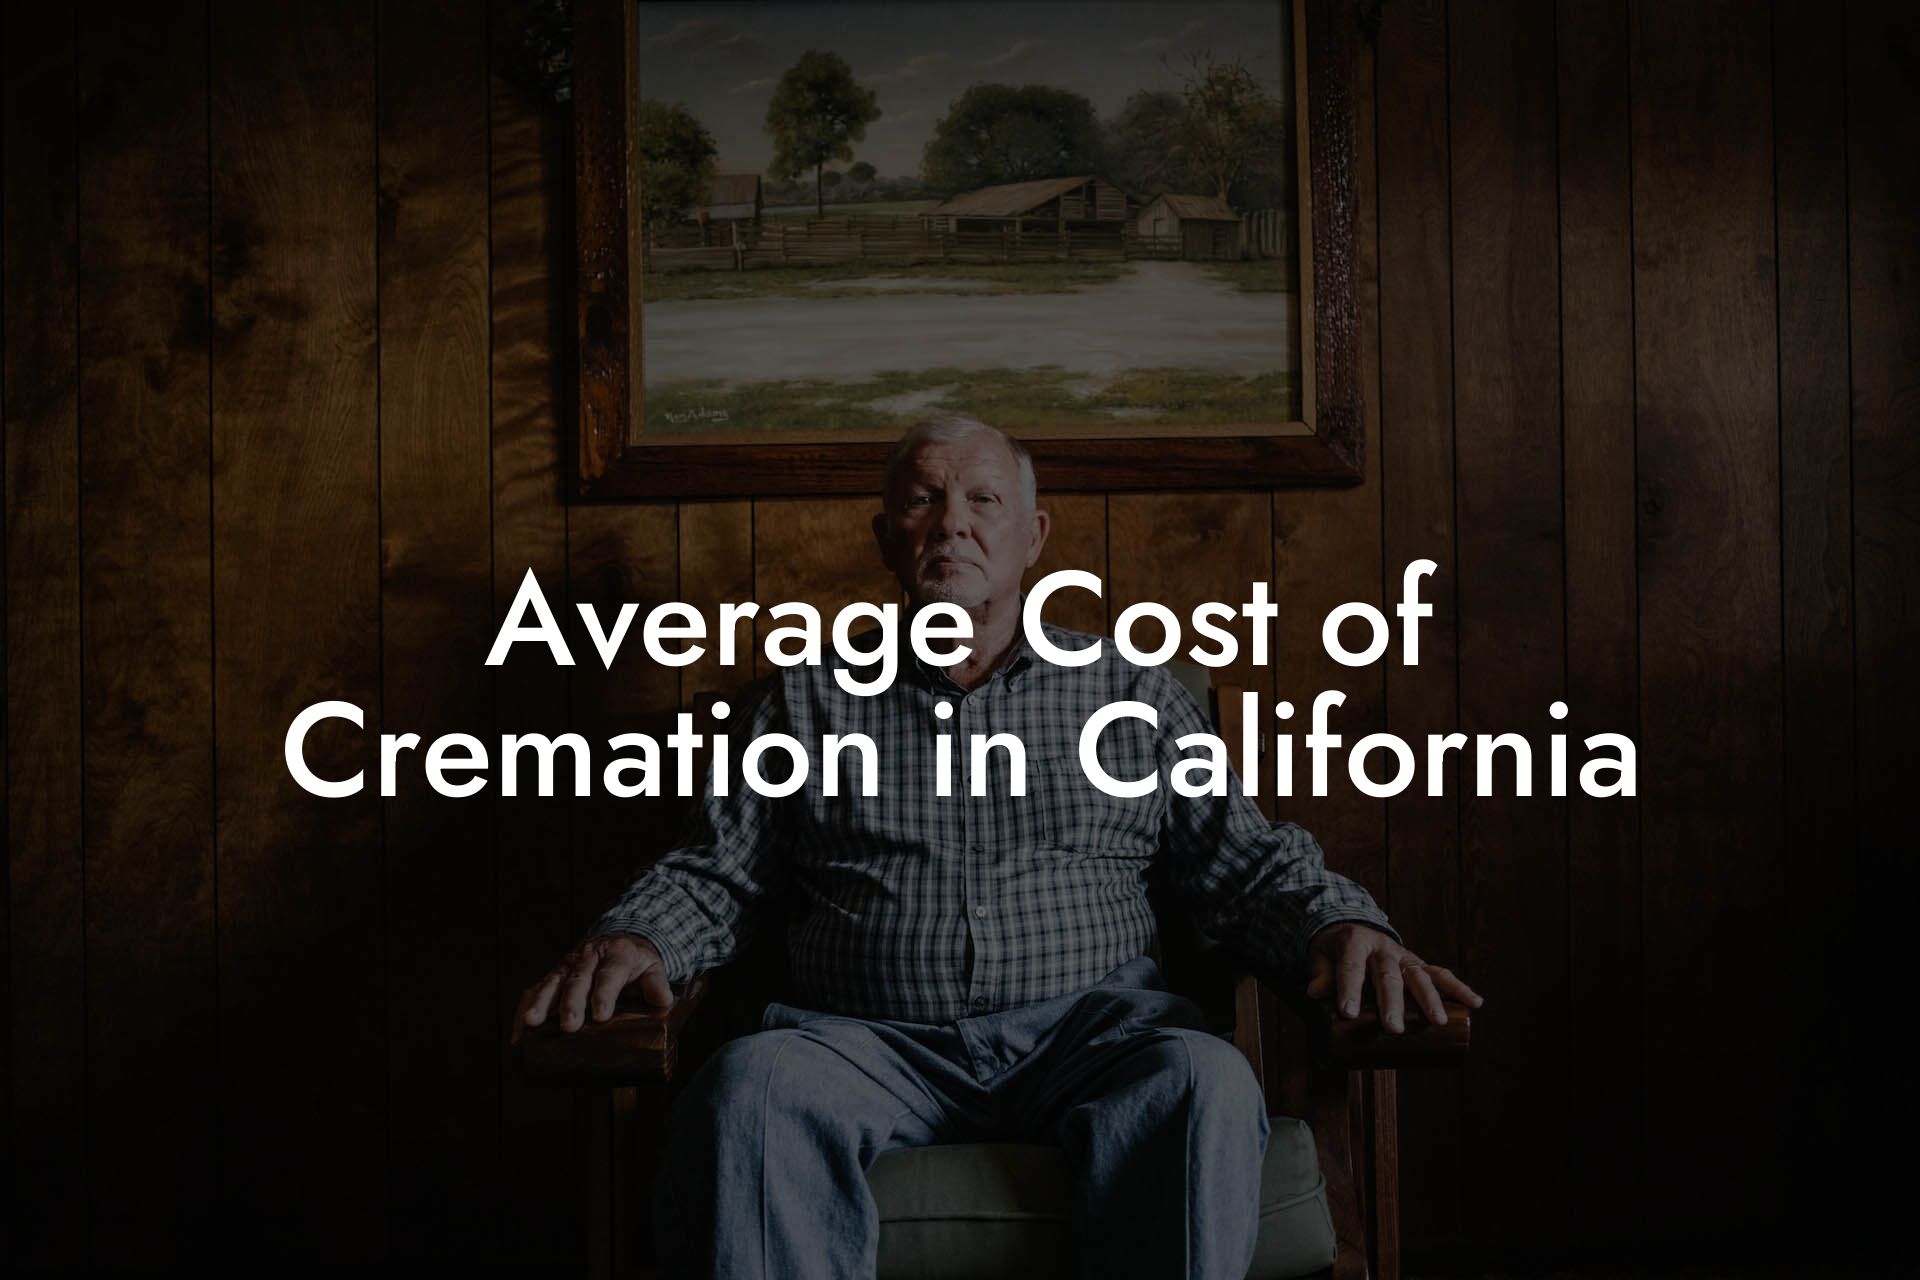 Average Cost of Cremation in California